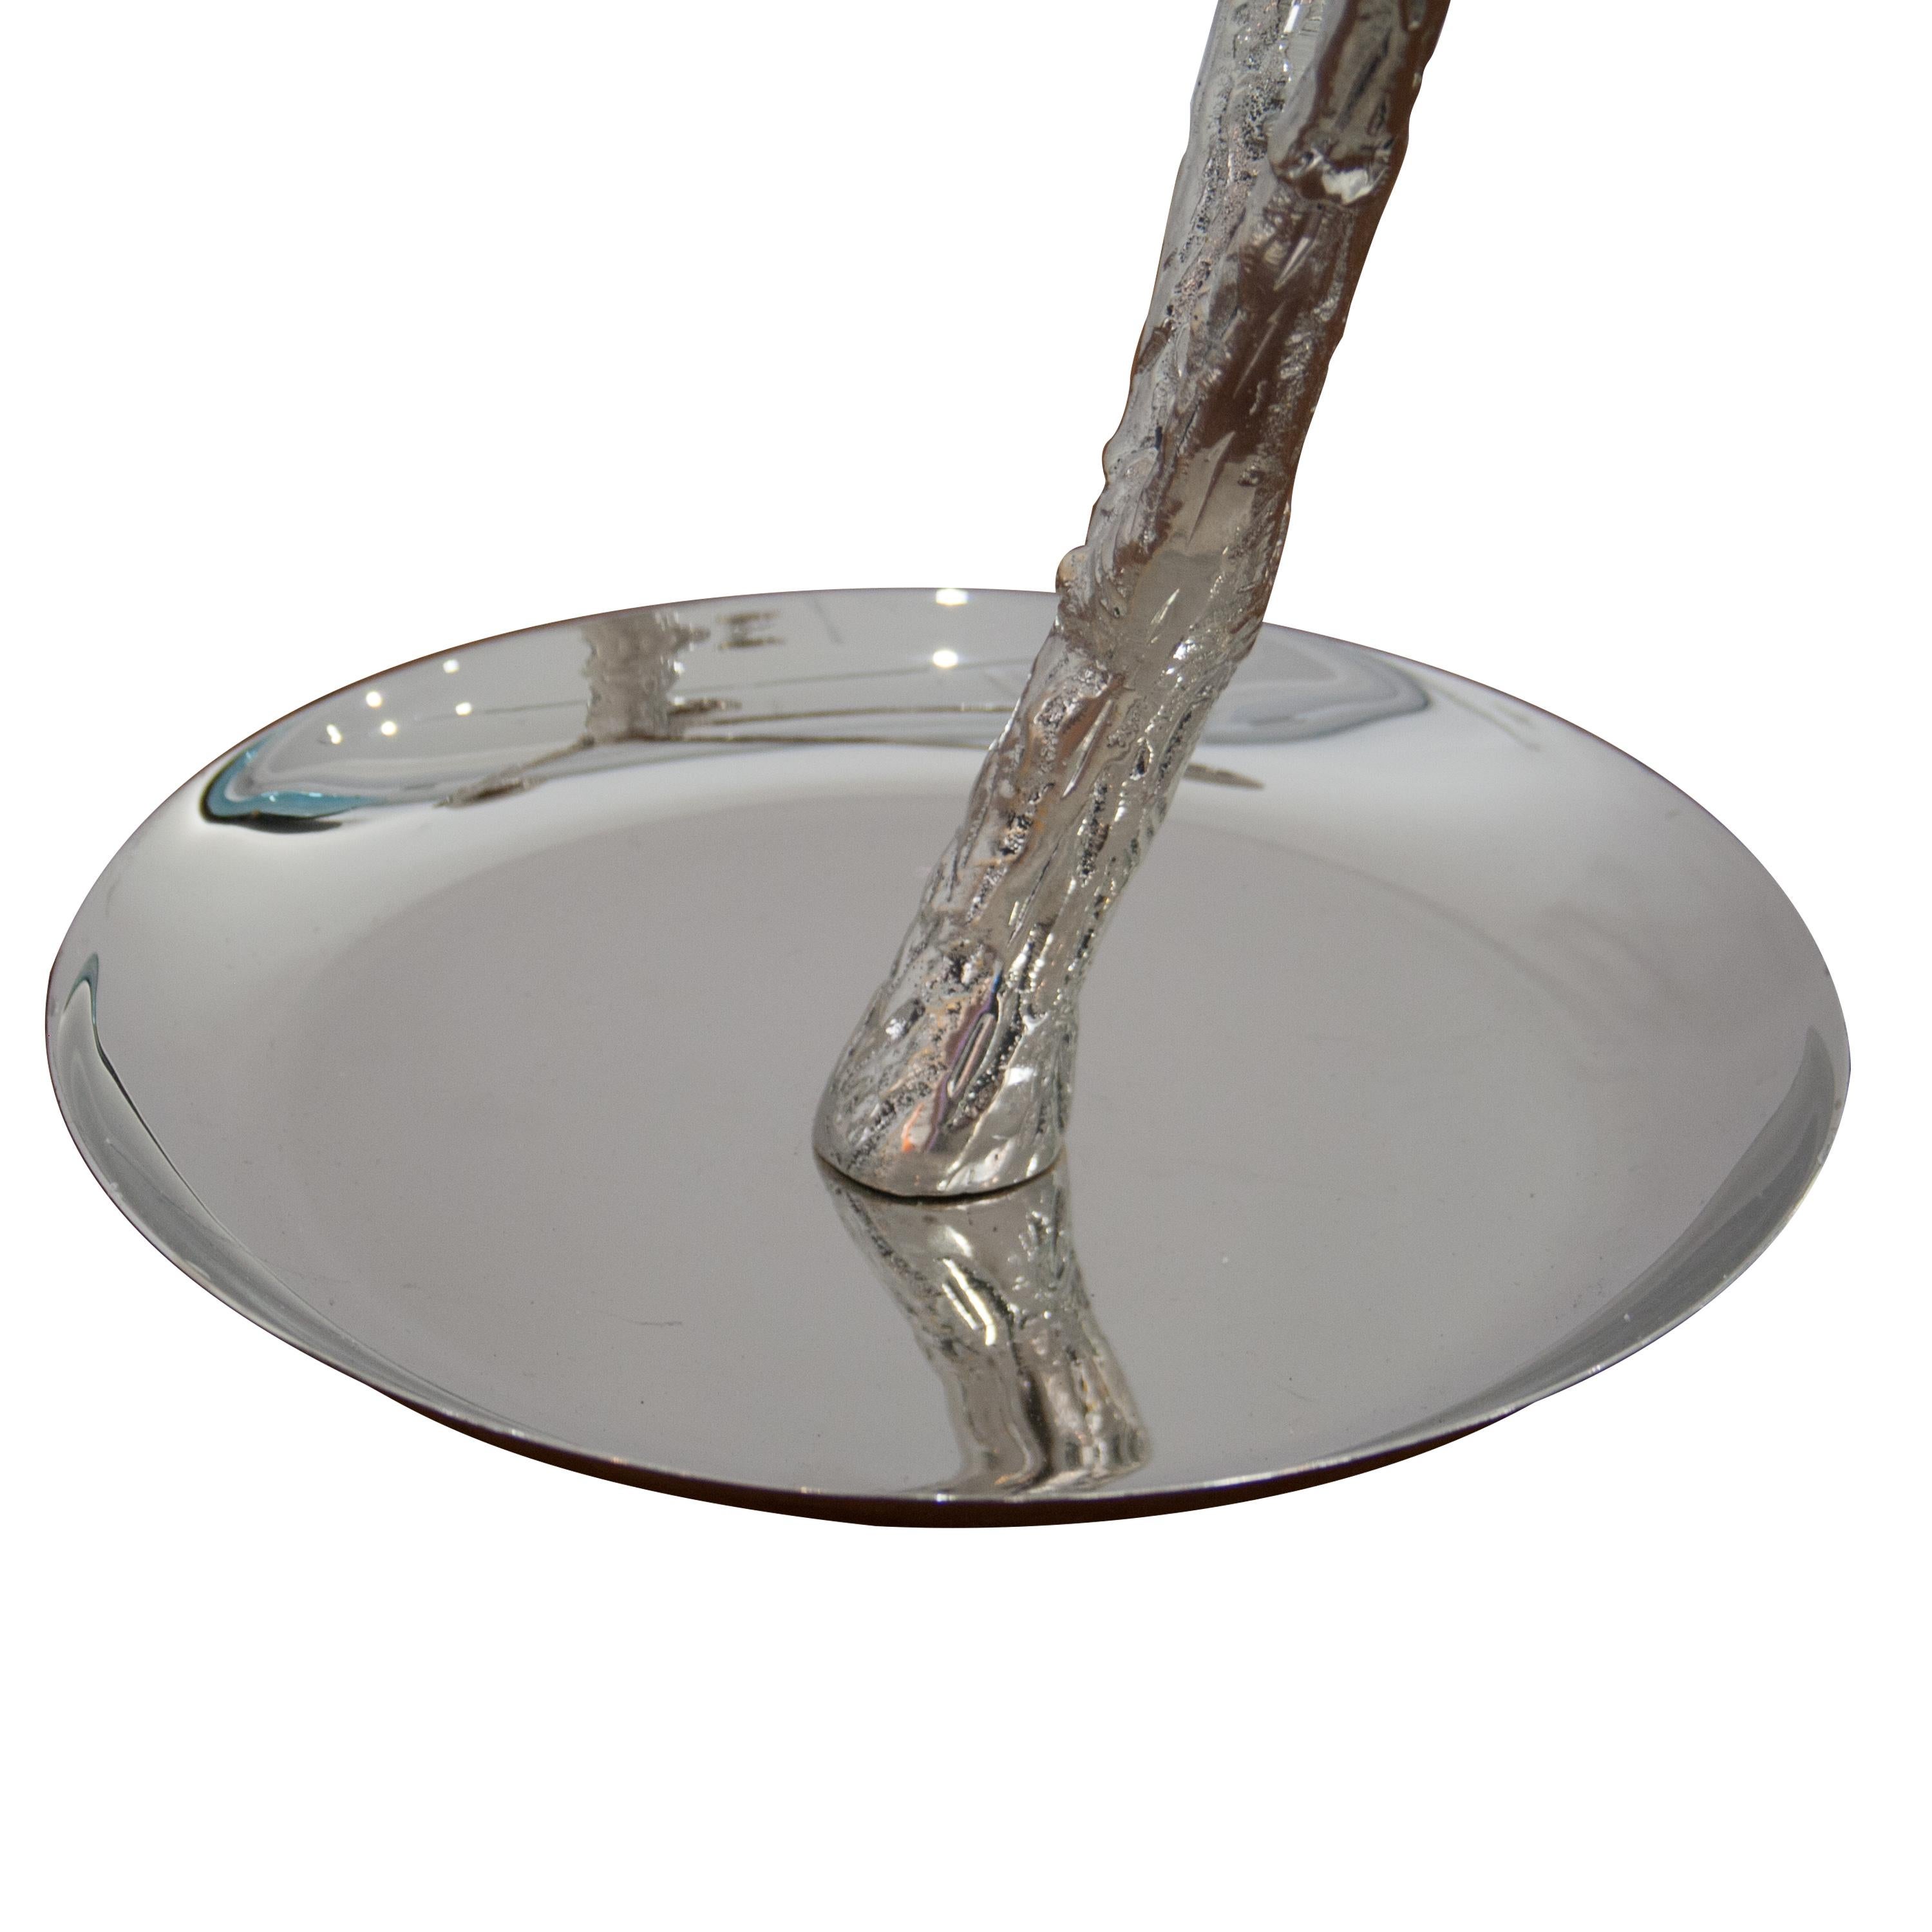 Modern Contemporary Nickel Plated Candle Holder, Netherlands, 2020 For Sale